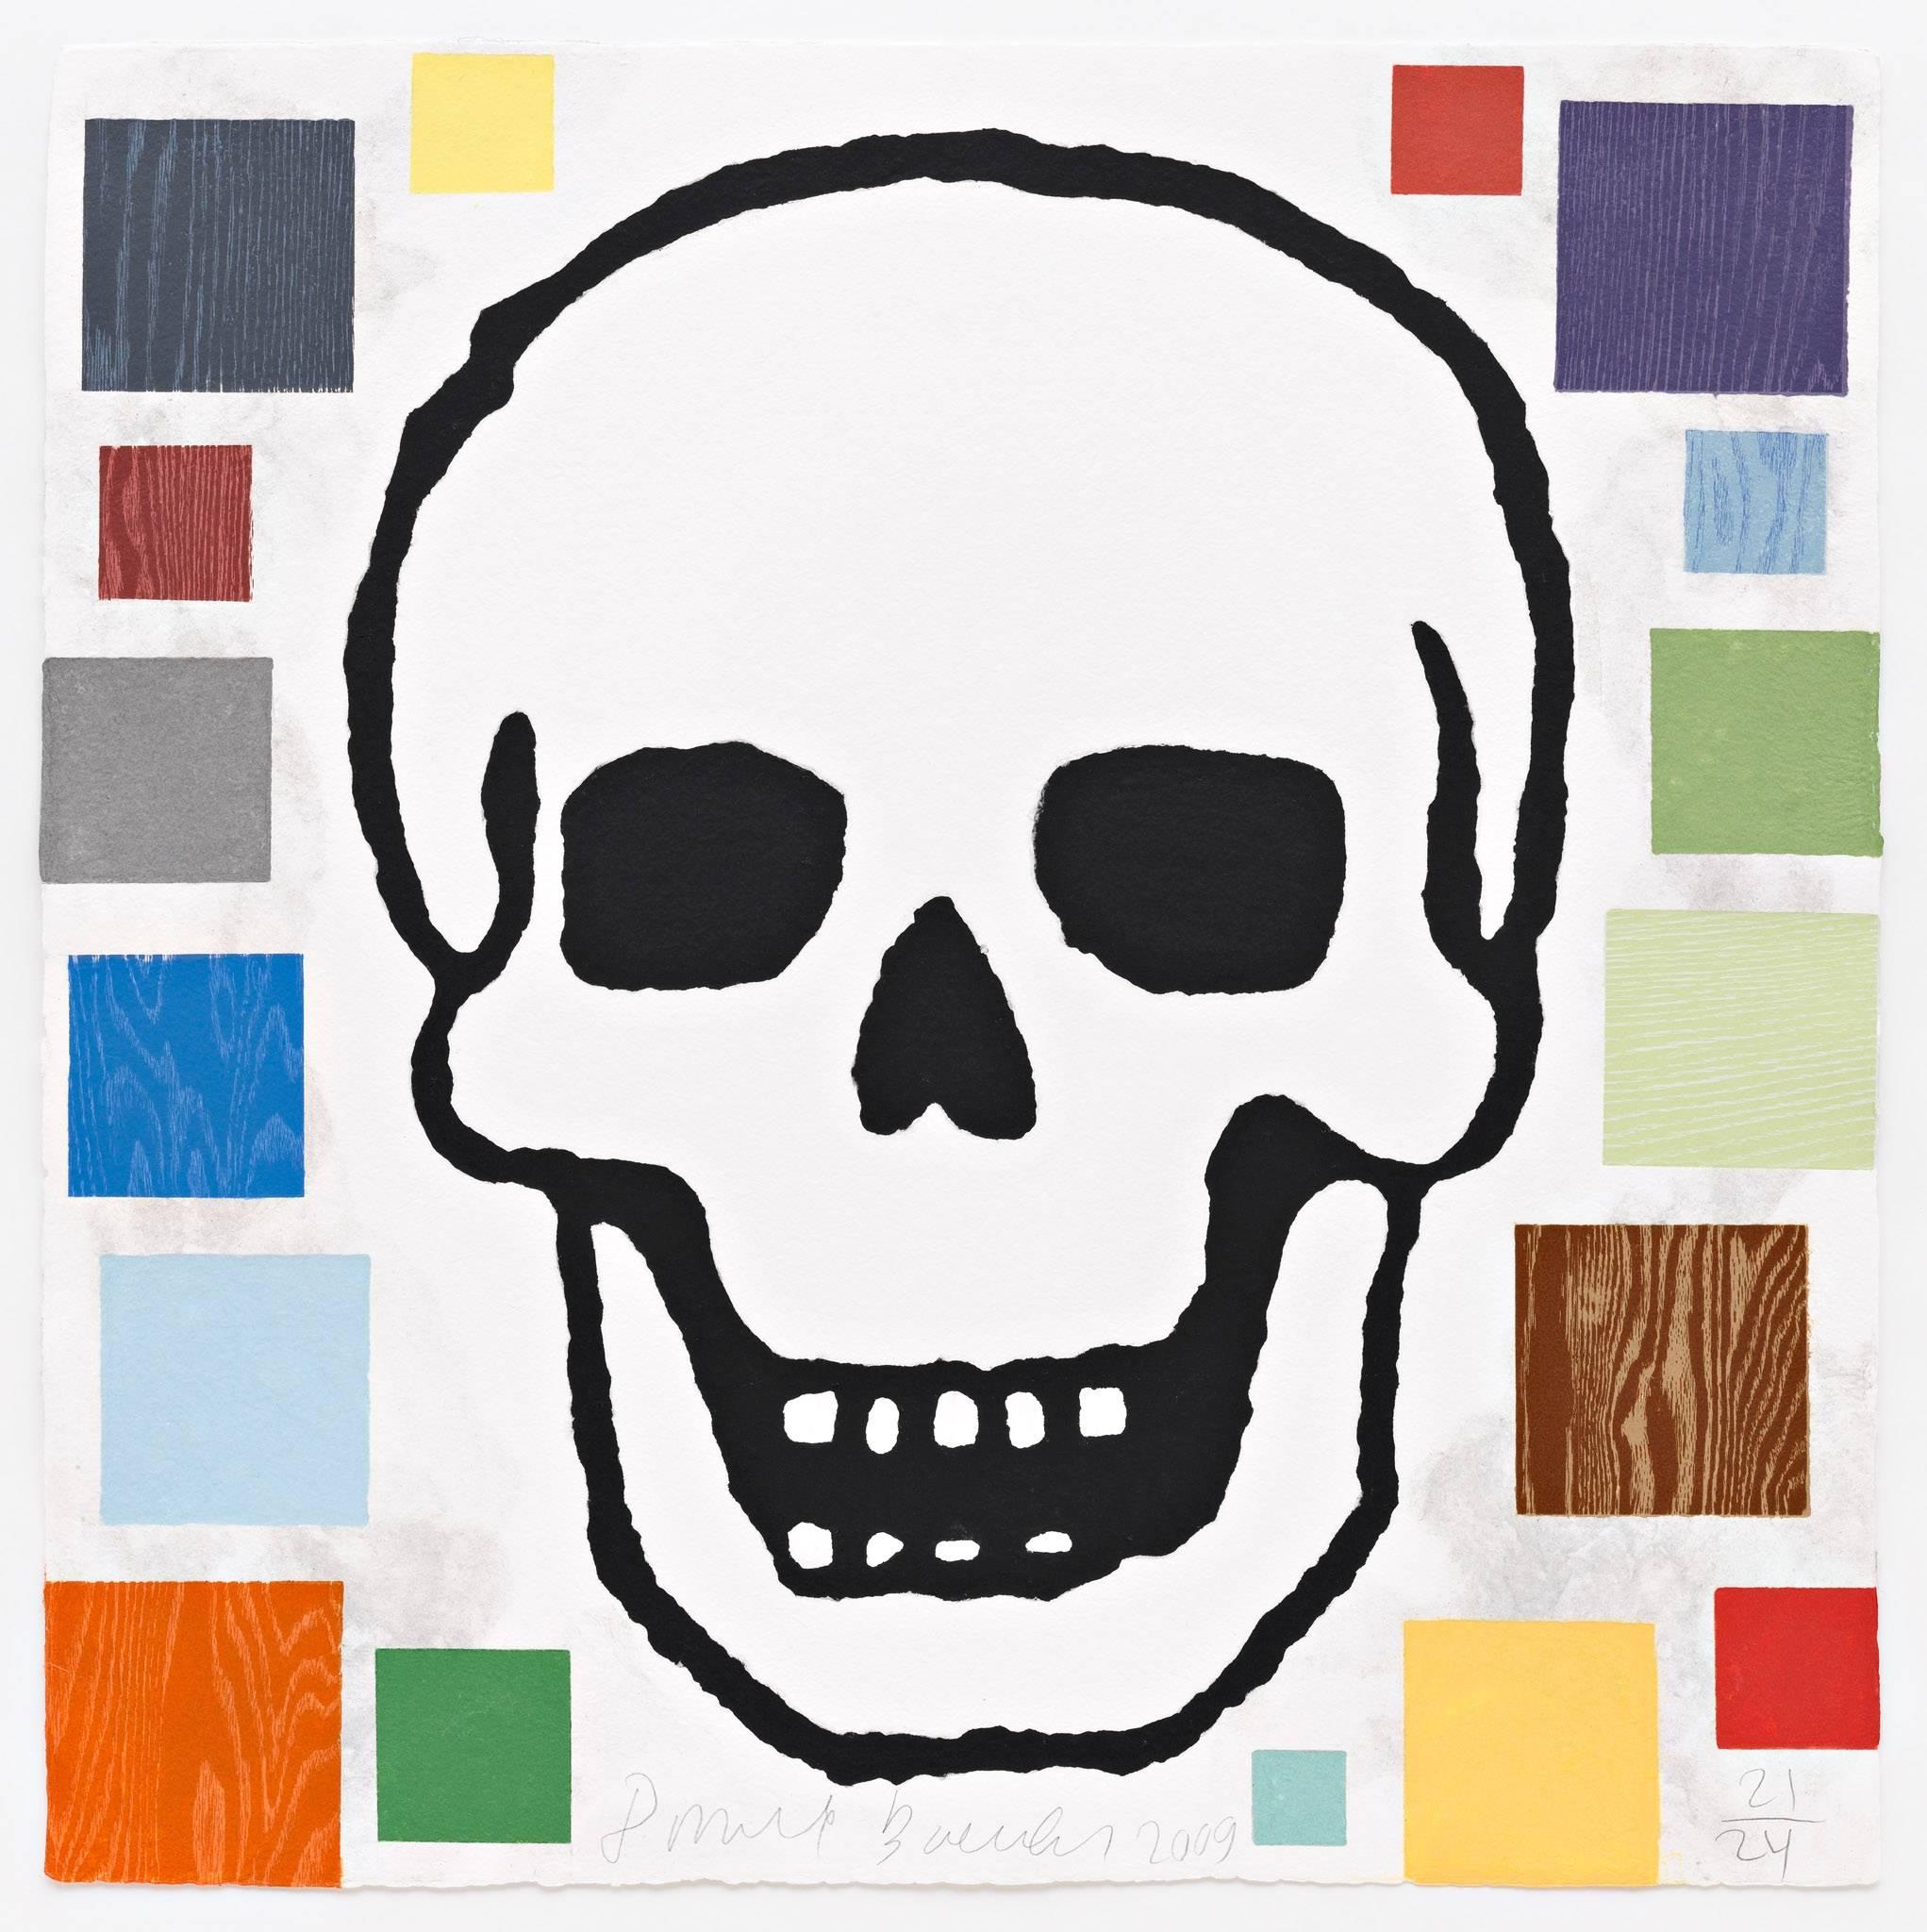 Abstract Composition with Skull - Print by Donald Baechler